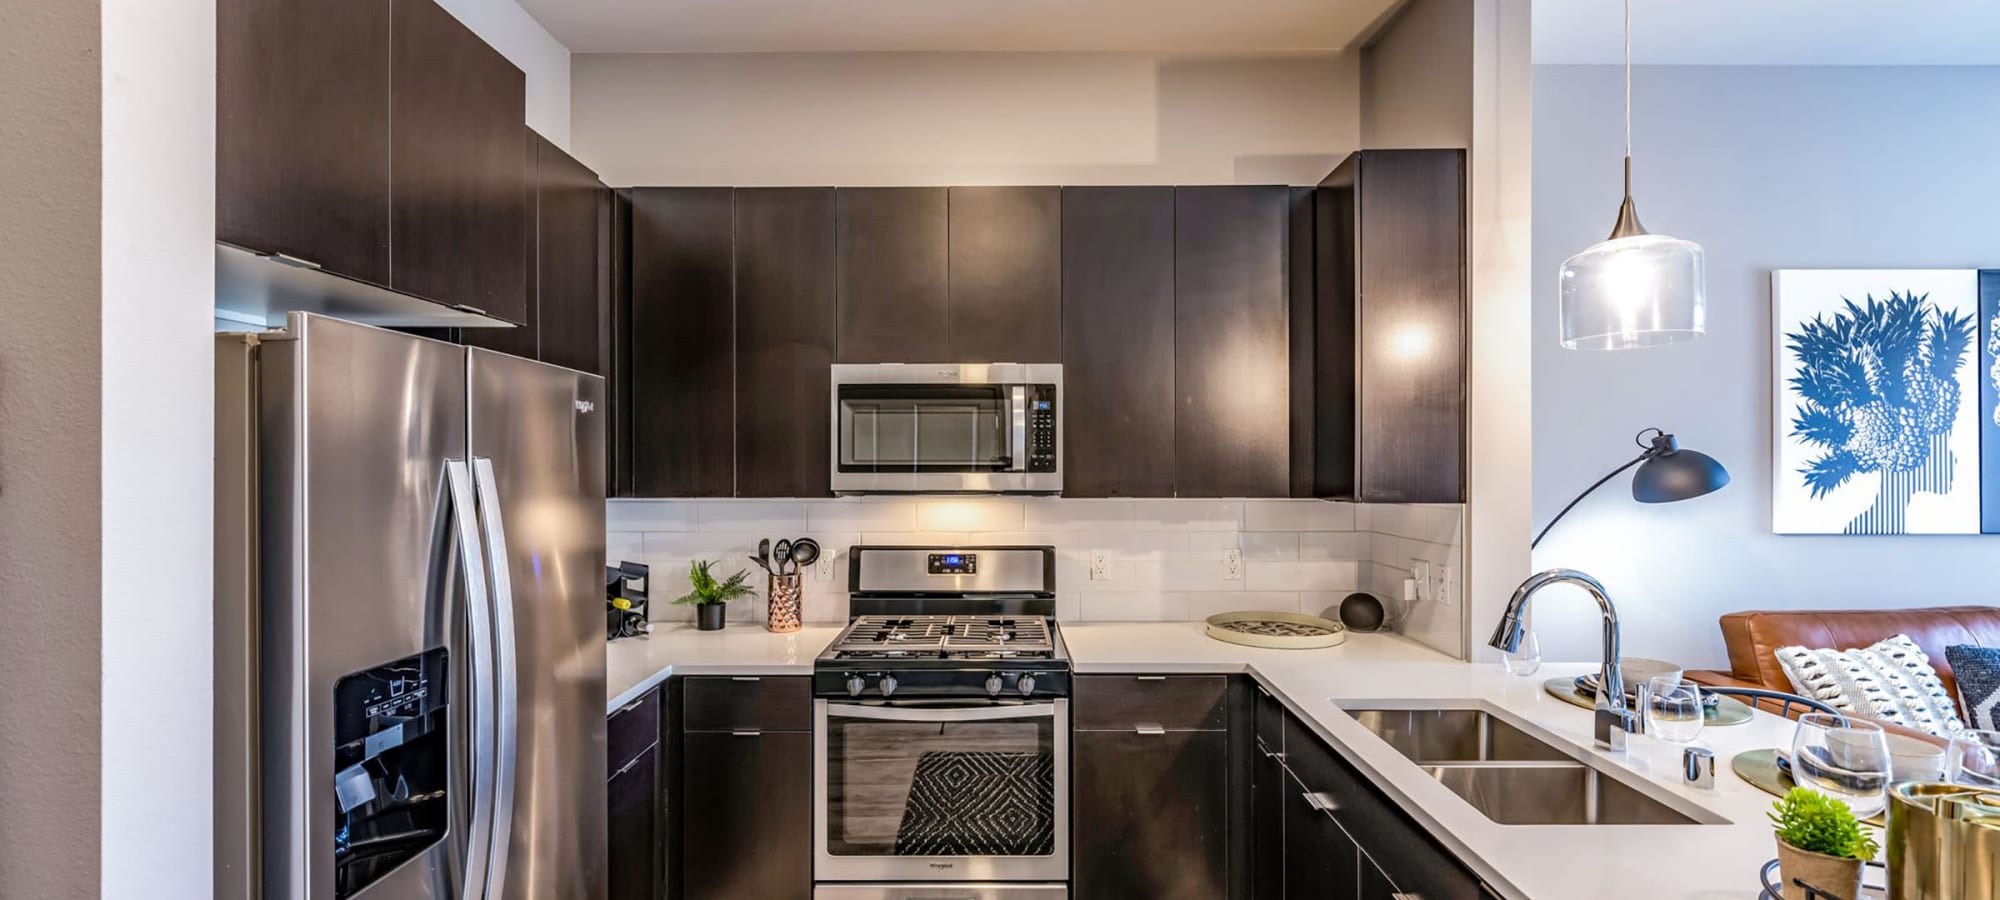 Stainless-steel energy-efficient appliances in a model apartment's kitchen at Jade Apartments in Las Vegas, Nevada